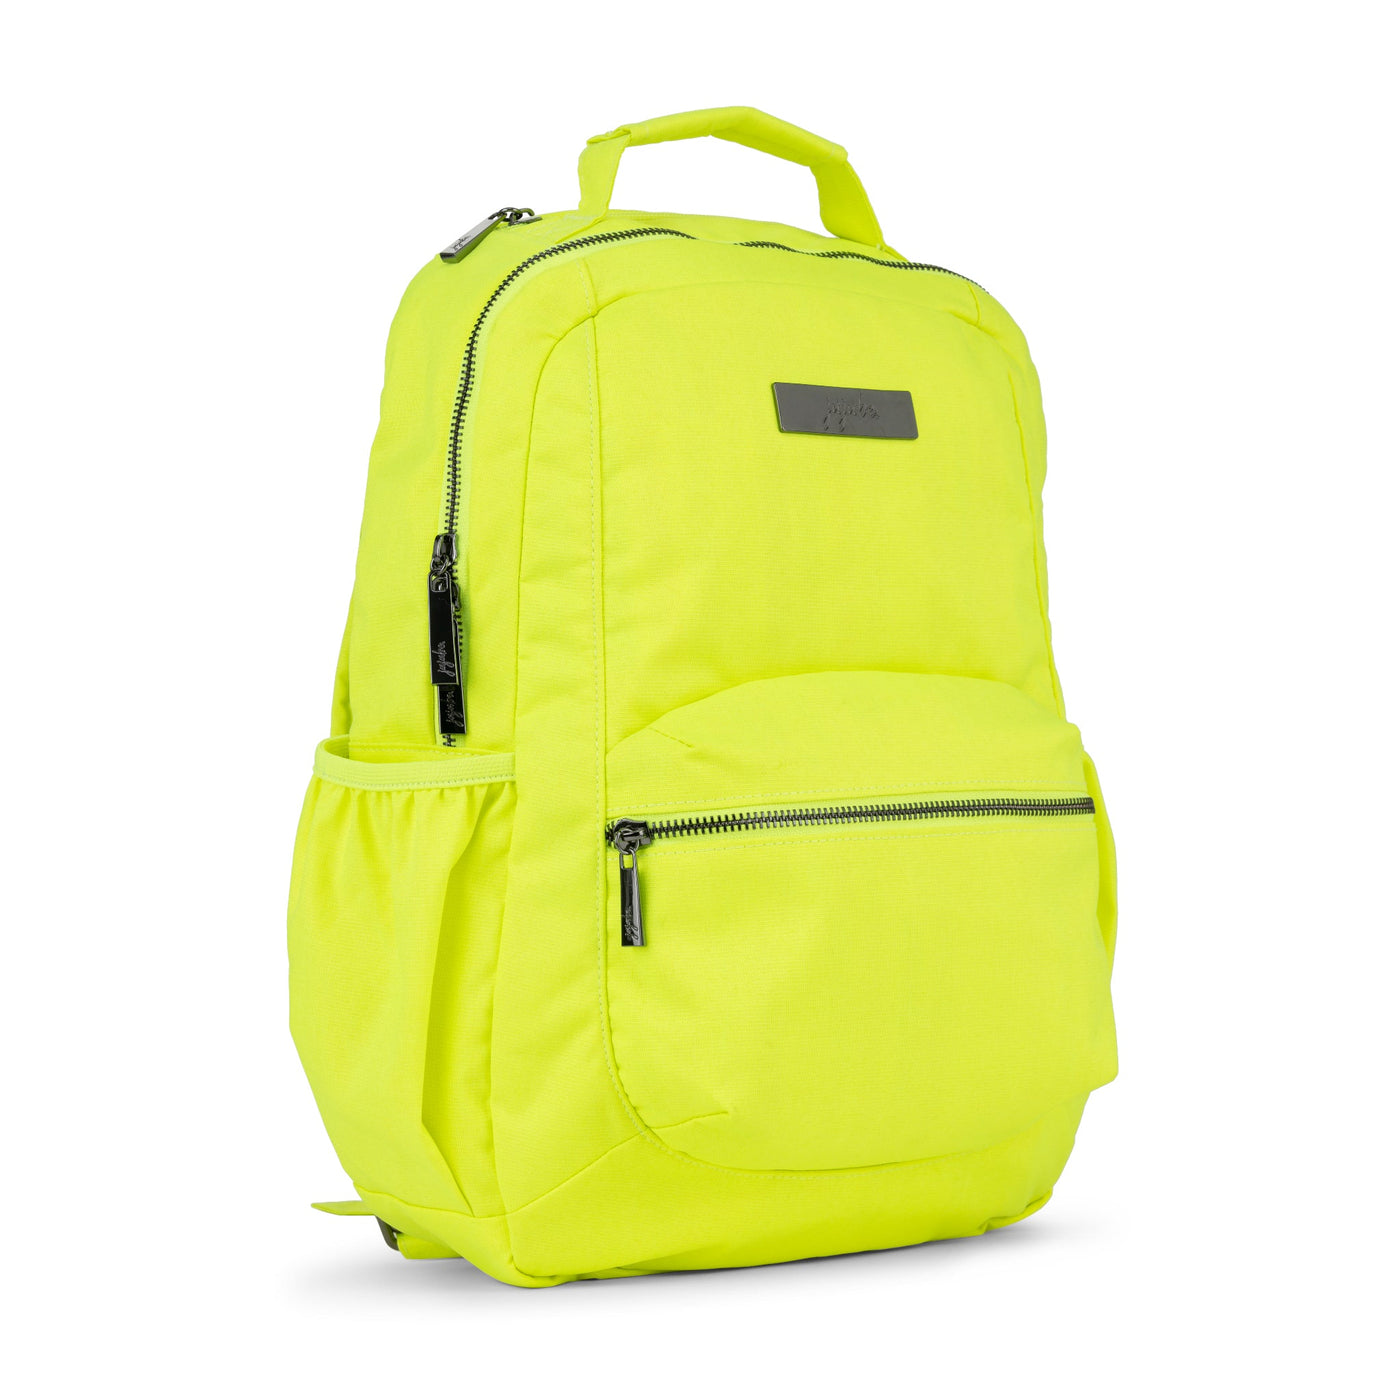 Be Packed - Highlighter Yellow by JuJuBe